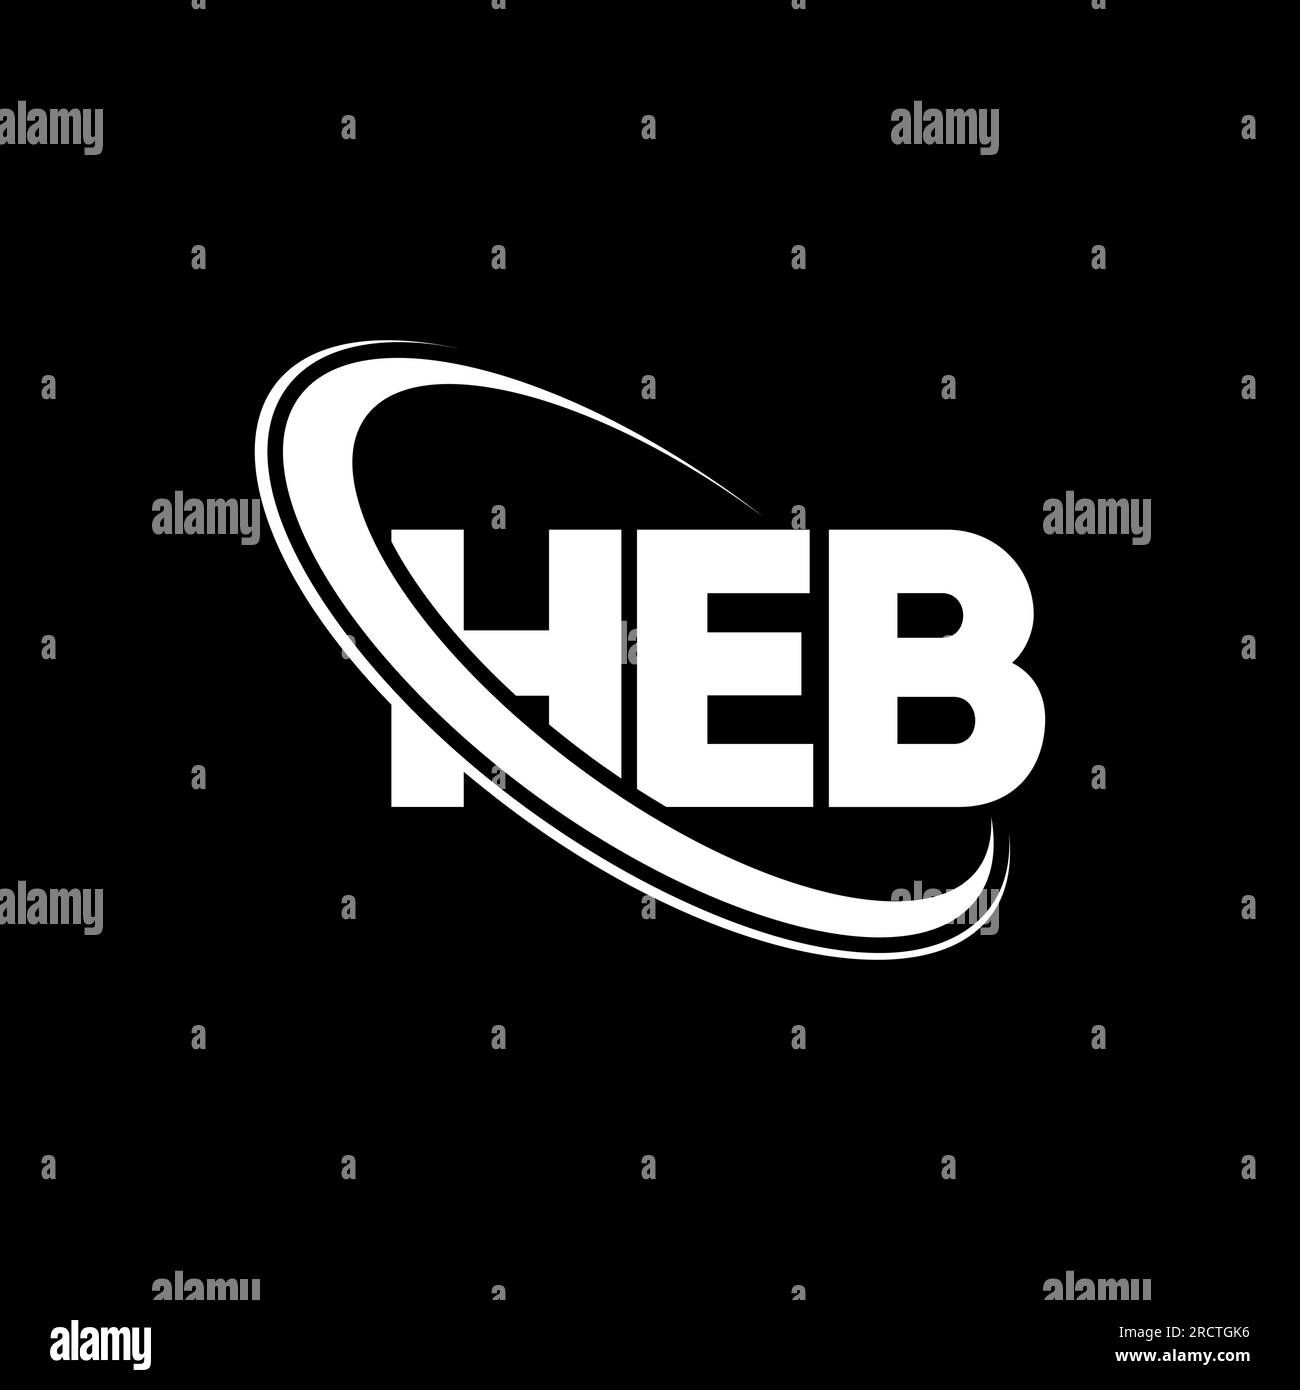 HEB logo. HEB letter. HEB letter logo design. Initials HEB logo linked with circle and uppercase monogram logo. HEB typography for technology, busines Stock Vector